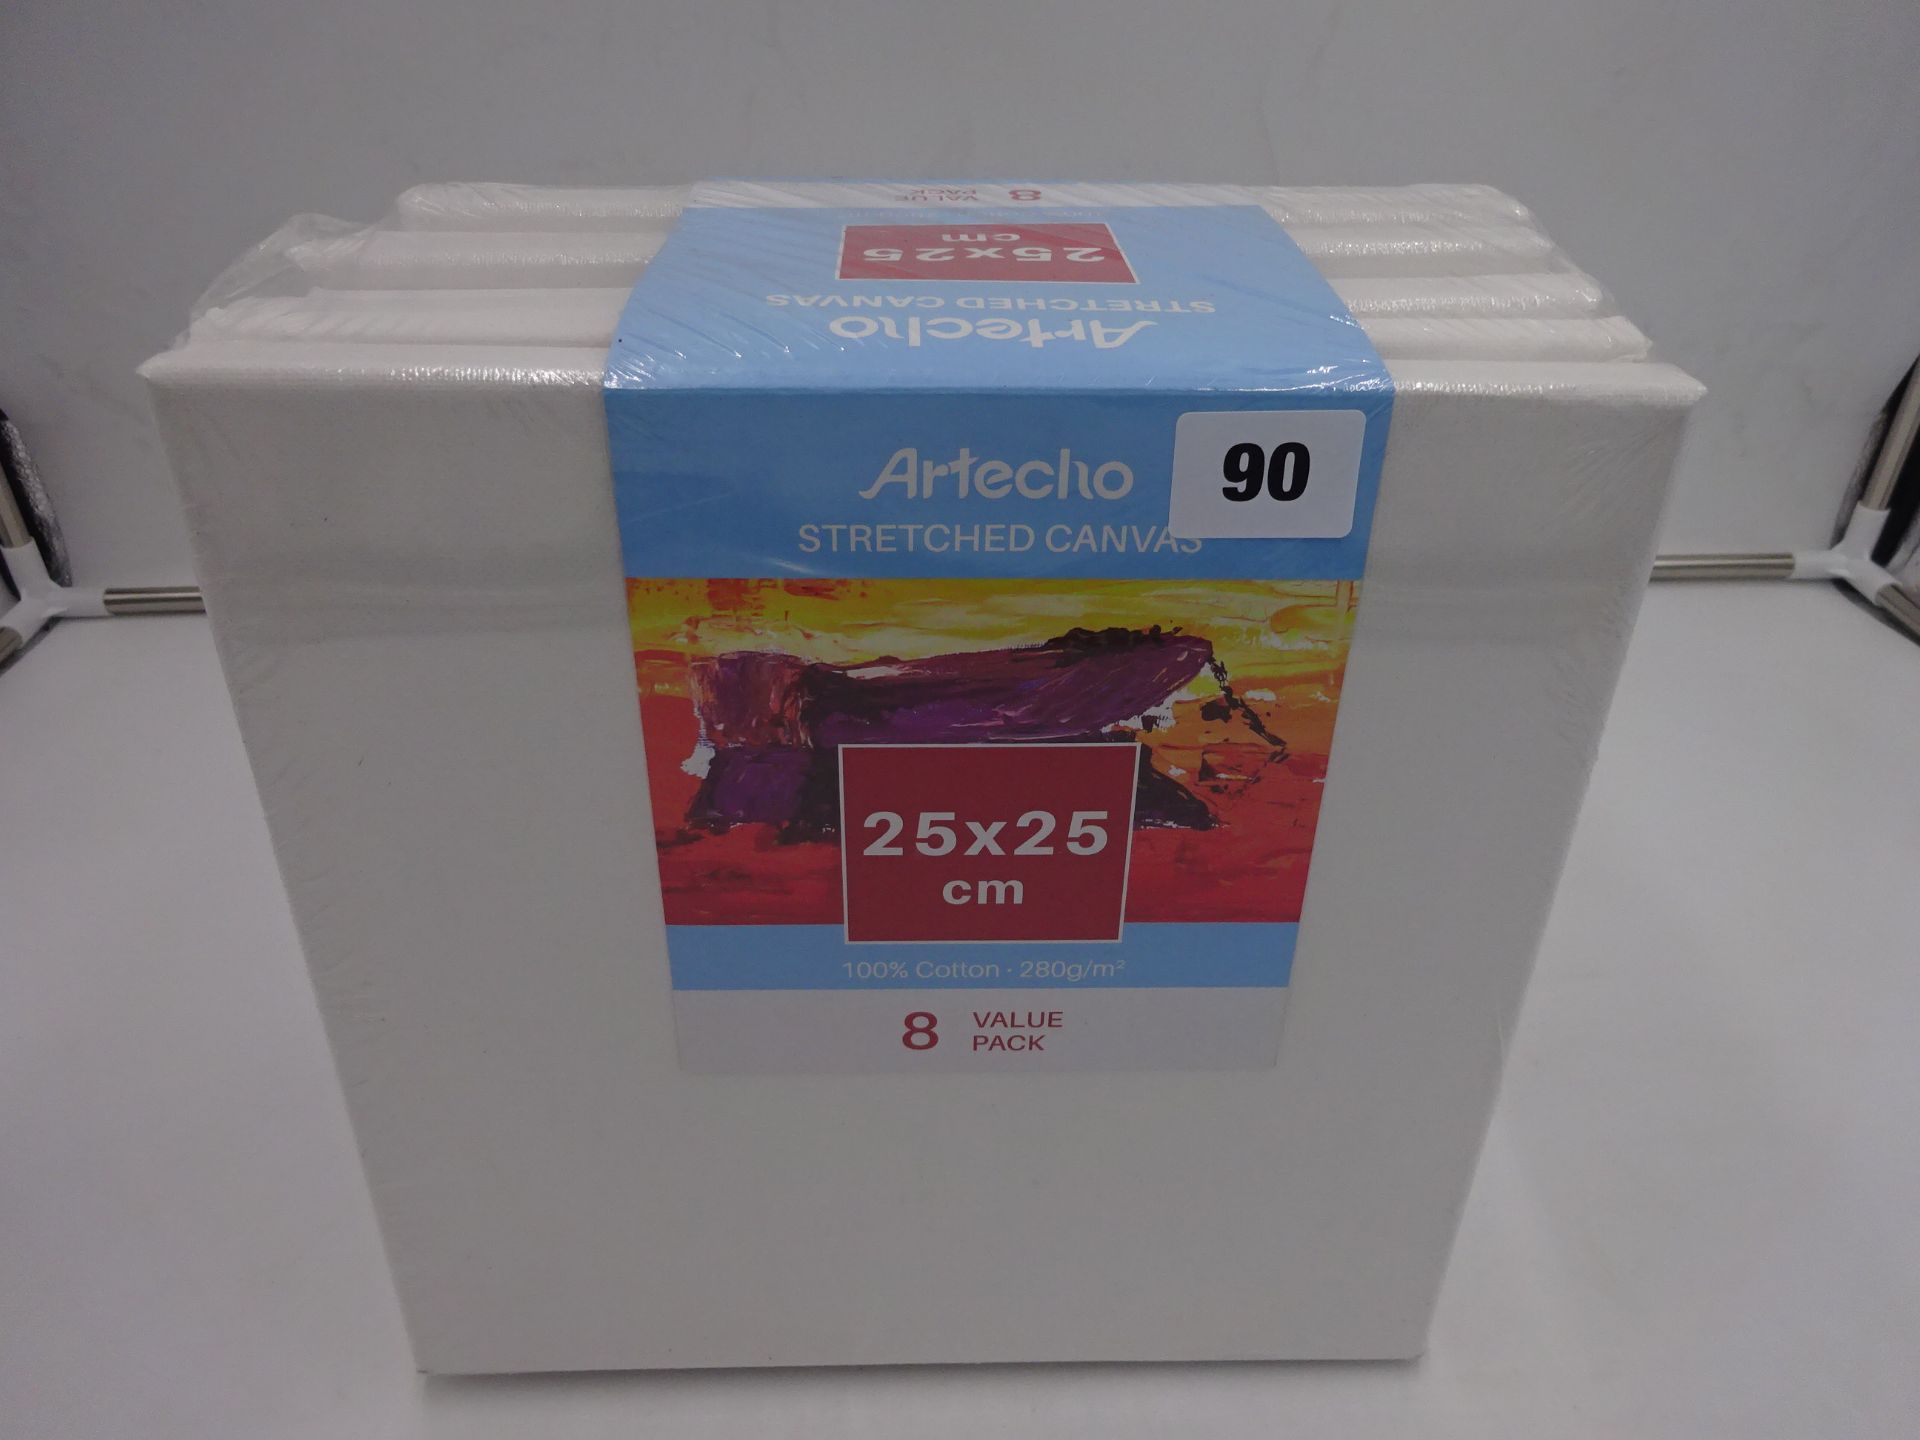 NEW S PACK OF 25 X 25CM ARTIST CANVASES